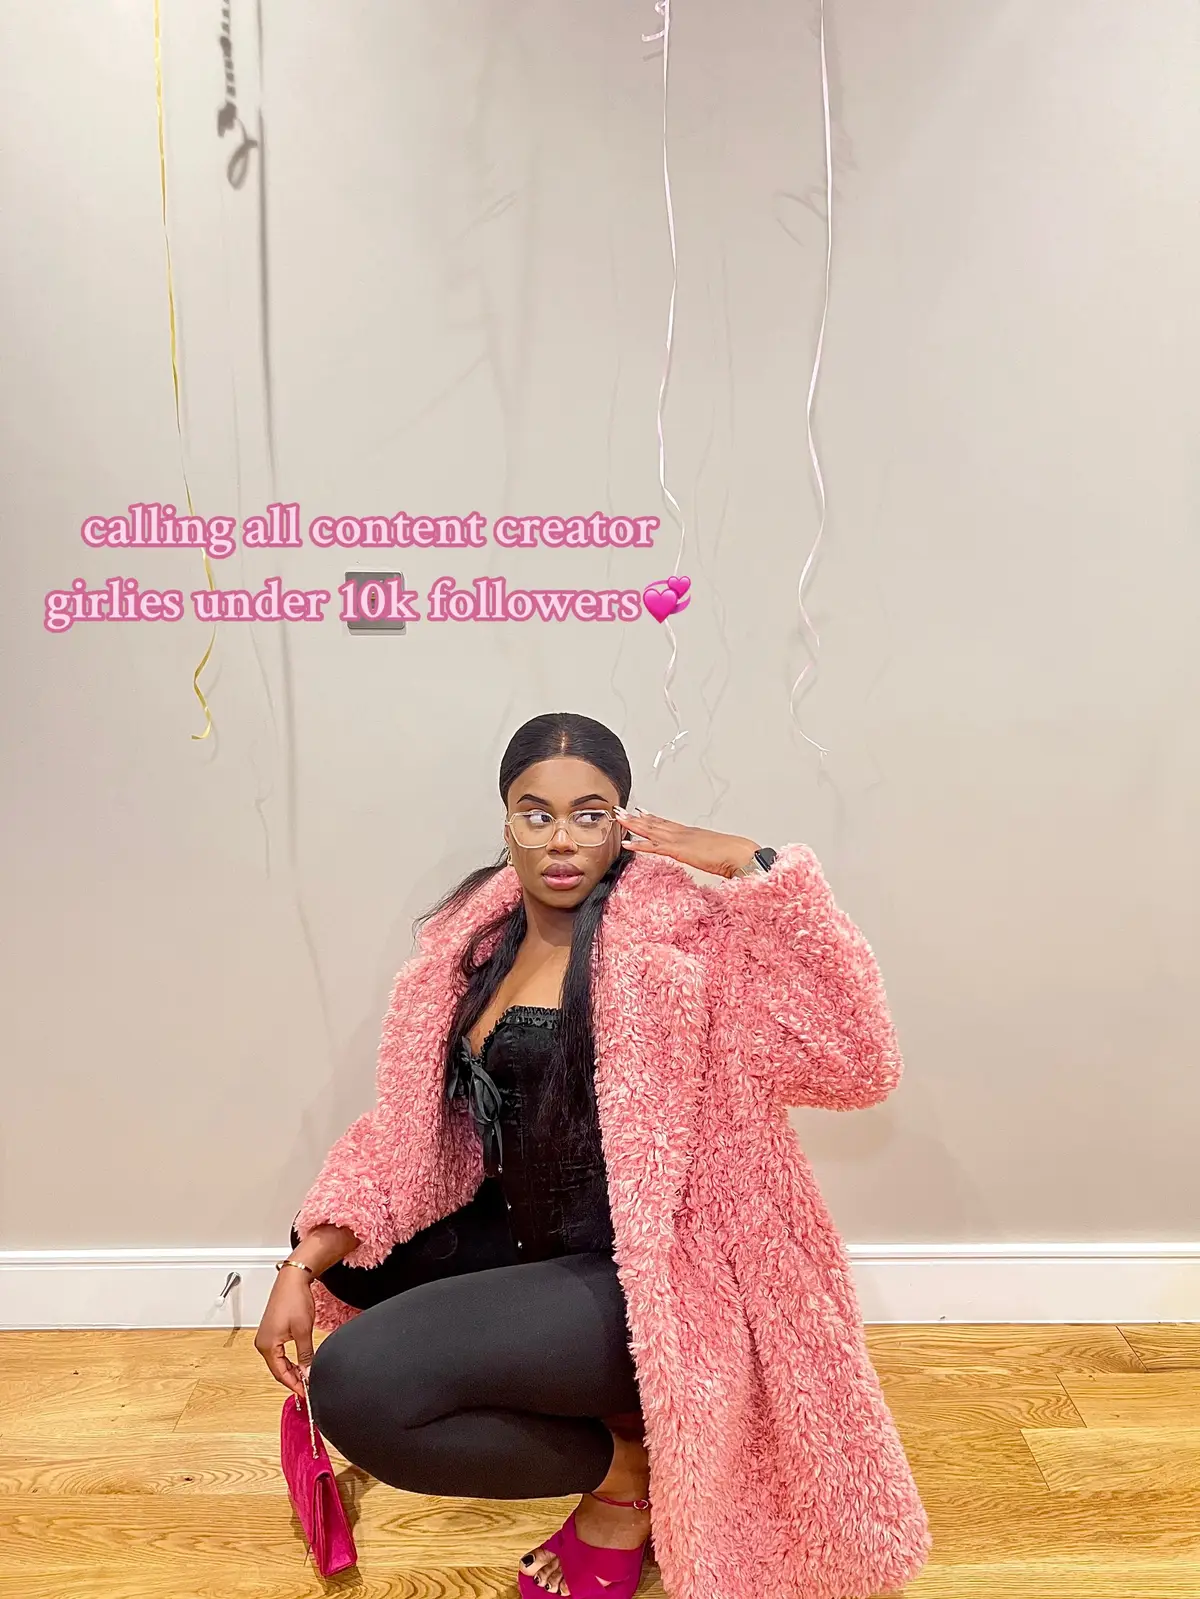 Lets step up our content game in 2024! Road to 10k this year!  Comment your 2024 follower goals 💐 #girlssupportgirls #fyp #followtrain #ukblackgirl #fashioncontentcreator #ValentinesDay #skincareinfluencer #roadto2k #roadto10k #blackcontentcreator #ukcontentcreator #nigeriantiktok🇳🇬 #nigeriansindiaspora #can #followtrain 